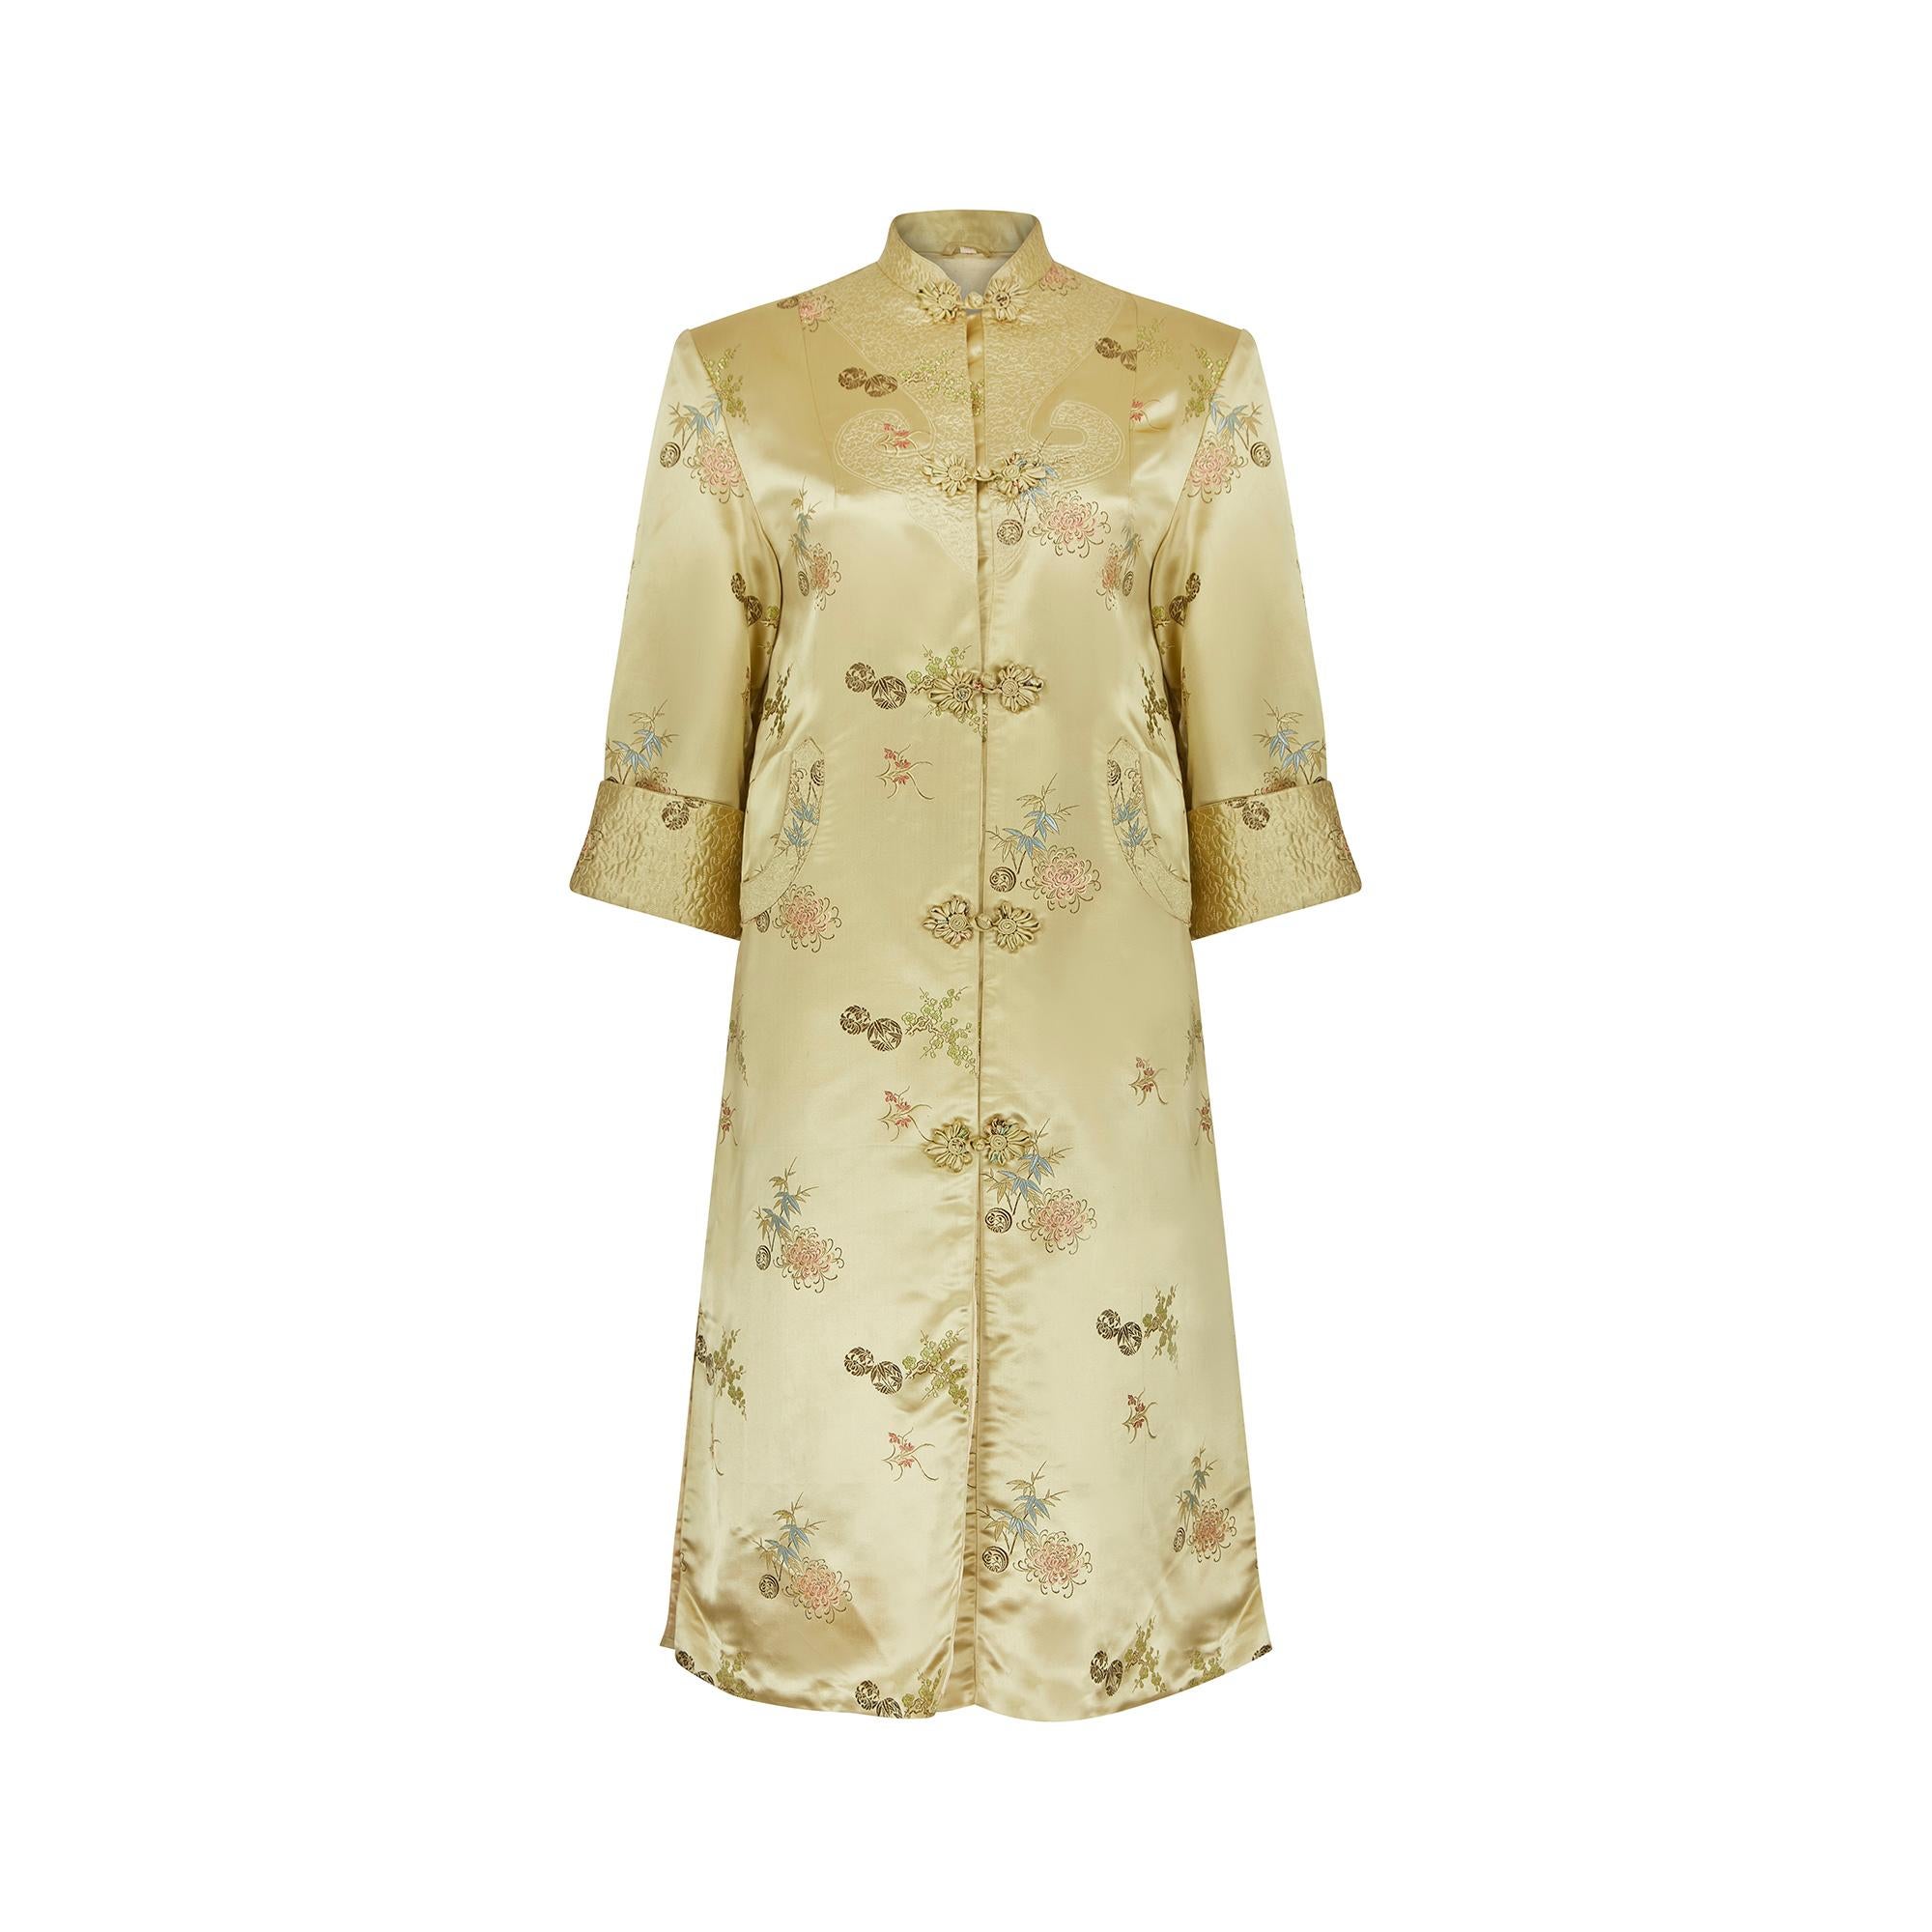 1960s Chinese dress coat which was made for the export market throughout the 50s and 60s in Shanghai.  In a lovely burnished gold manmade satin jacquard fabric with a neat floral arrangement of honeysuckle, bamboo and cherry blossom in soft tones of